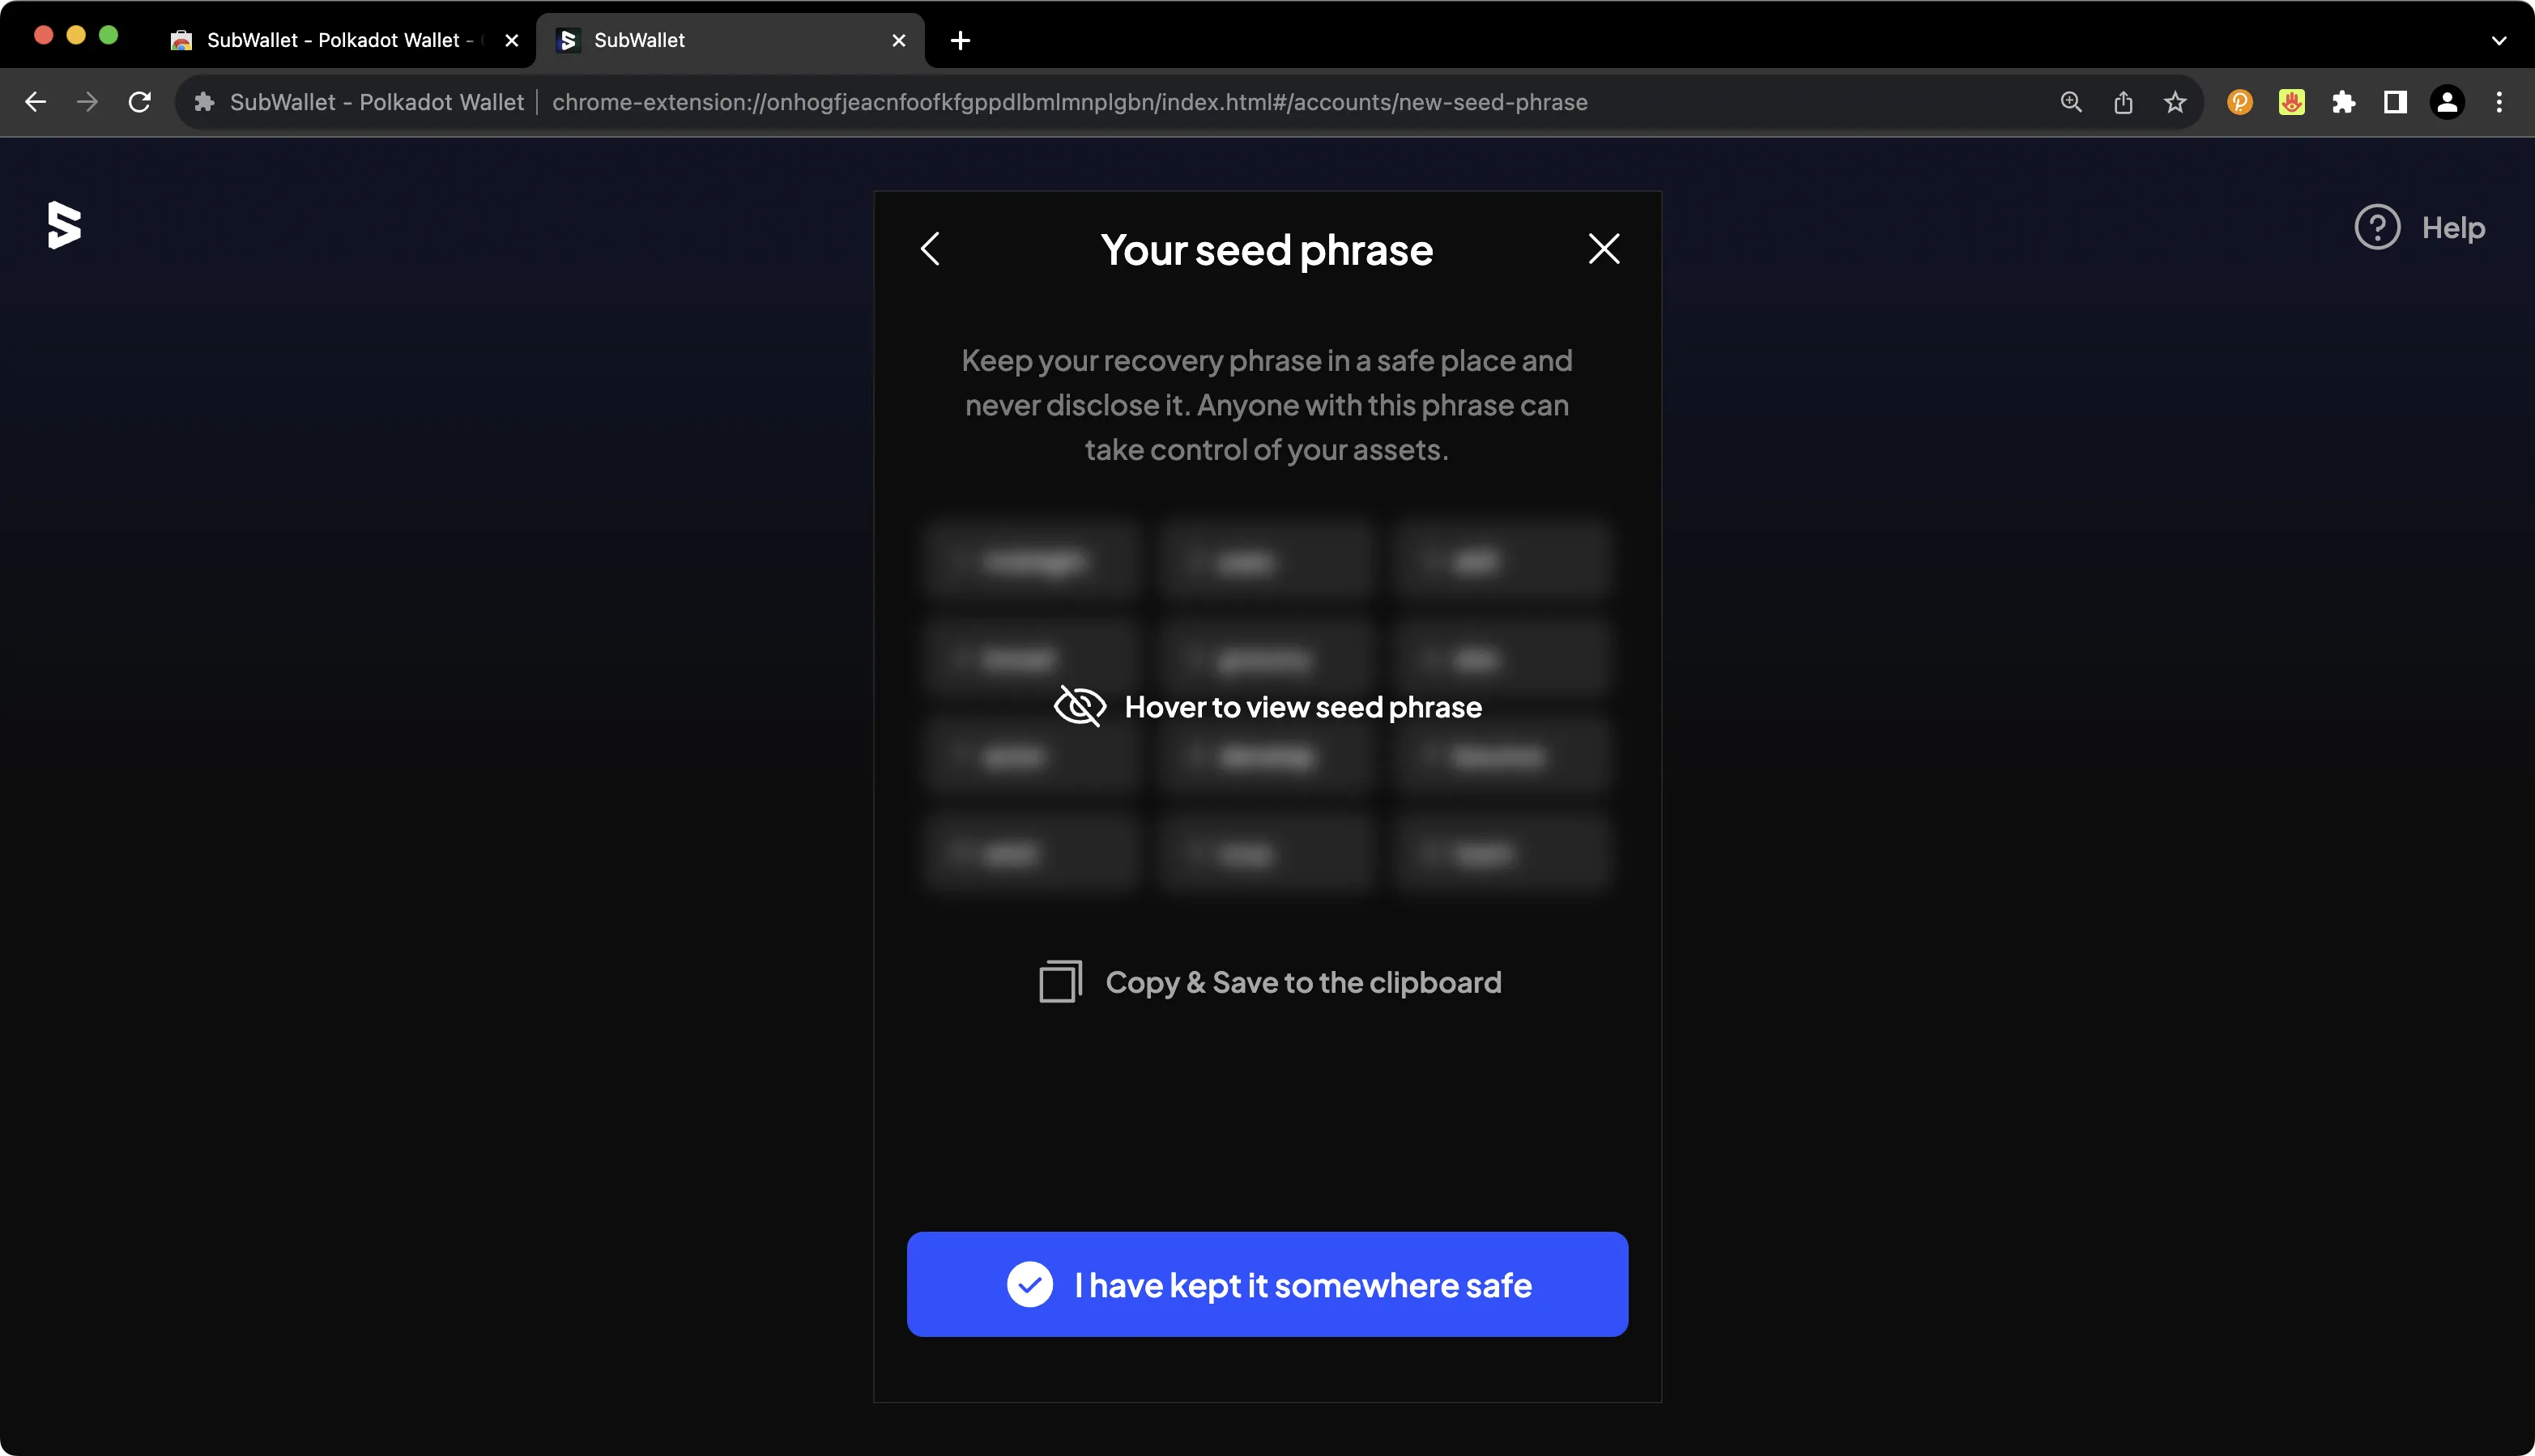 Back up your seed phrase in SubWallet